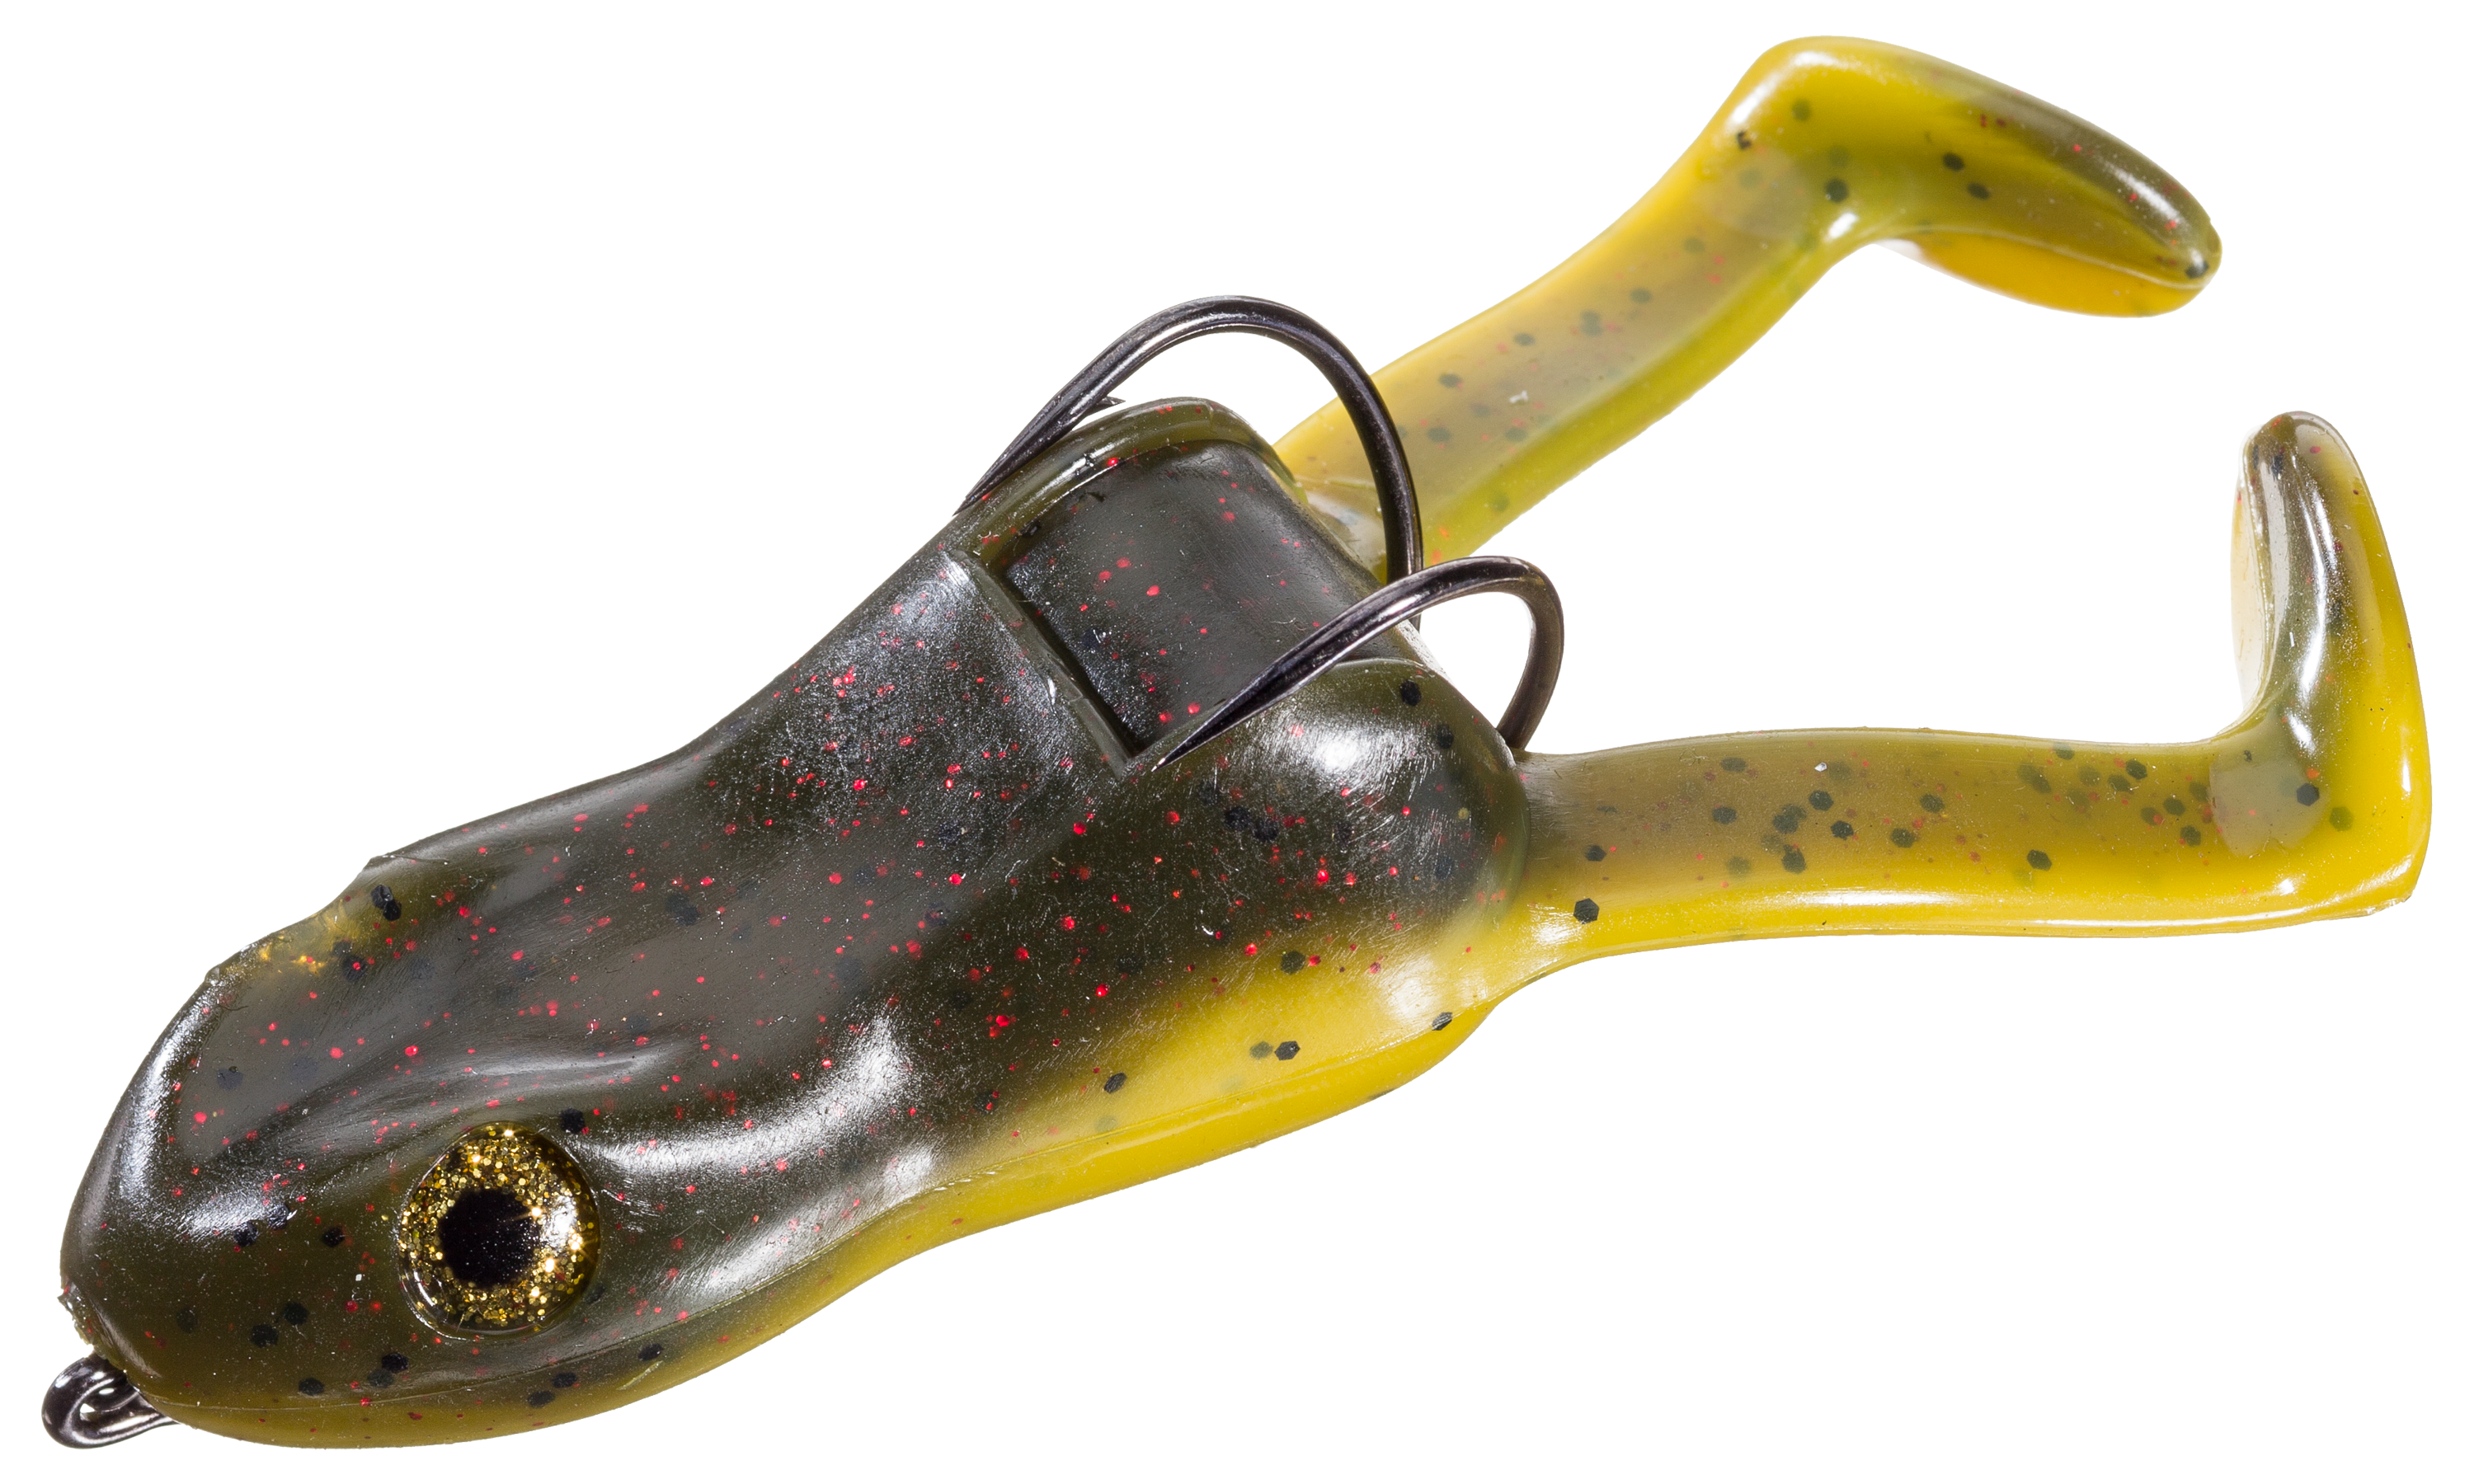 Stanley Top Toad Fishing Tackle Review - Wired2Fish